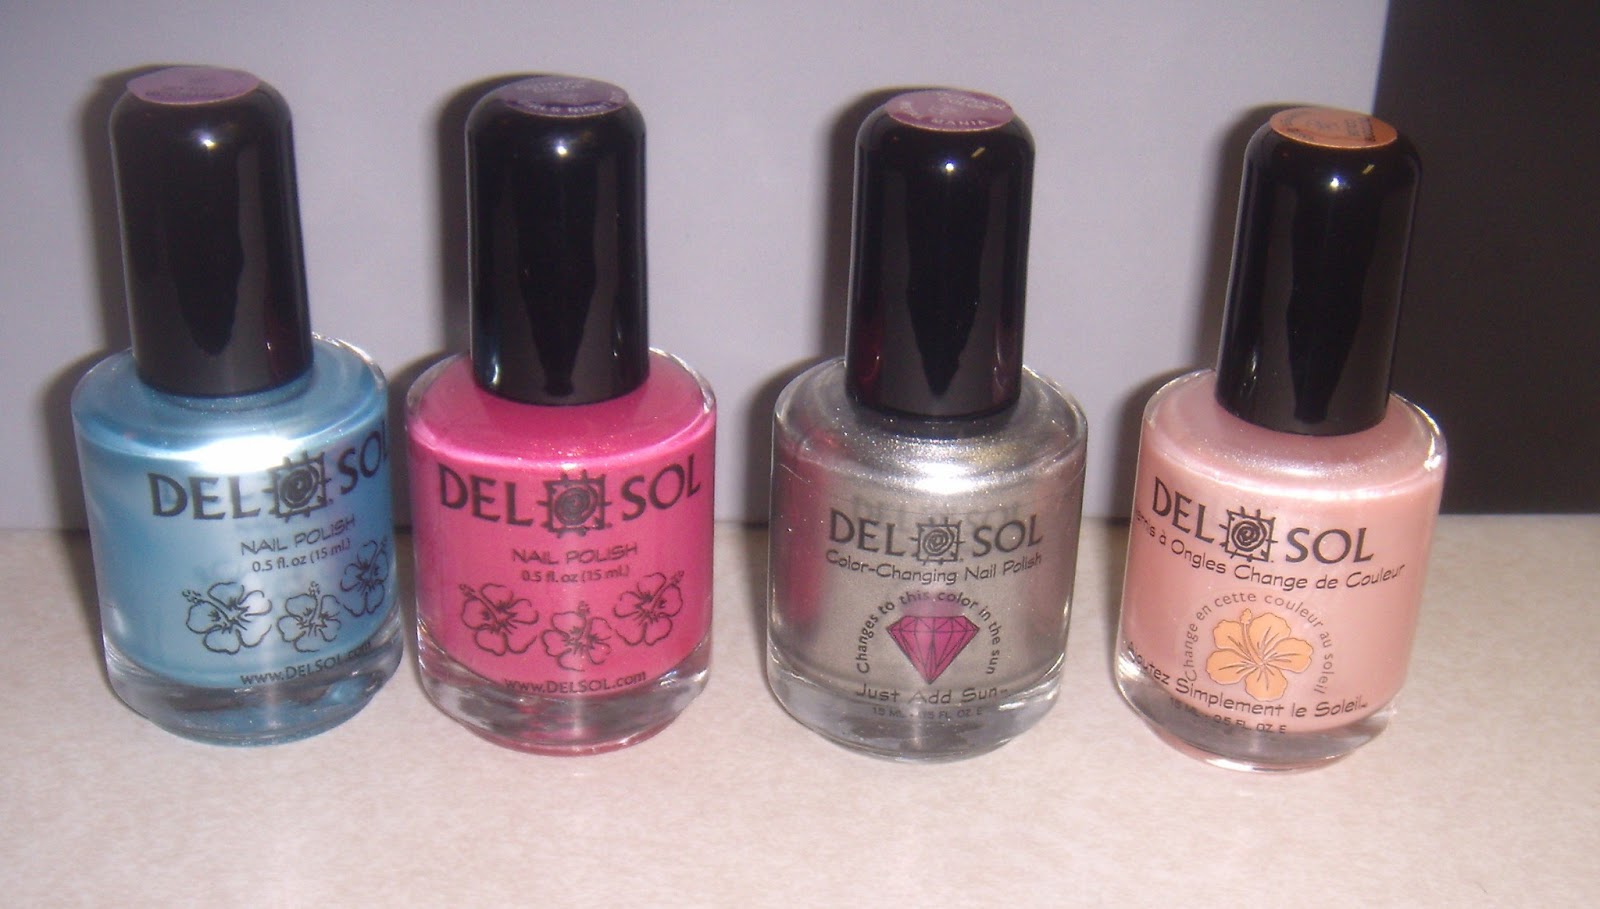 1. Del Sol Color Changing Nail Polish - wide 3